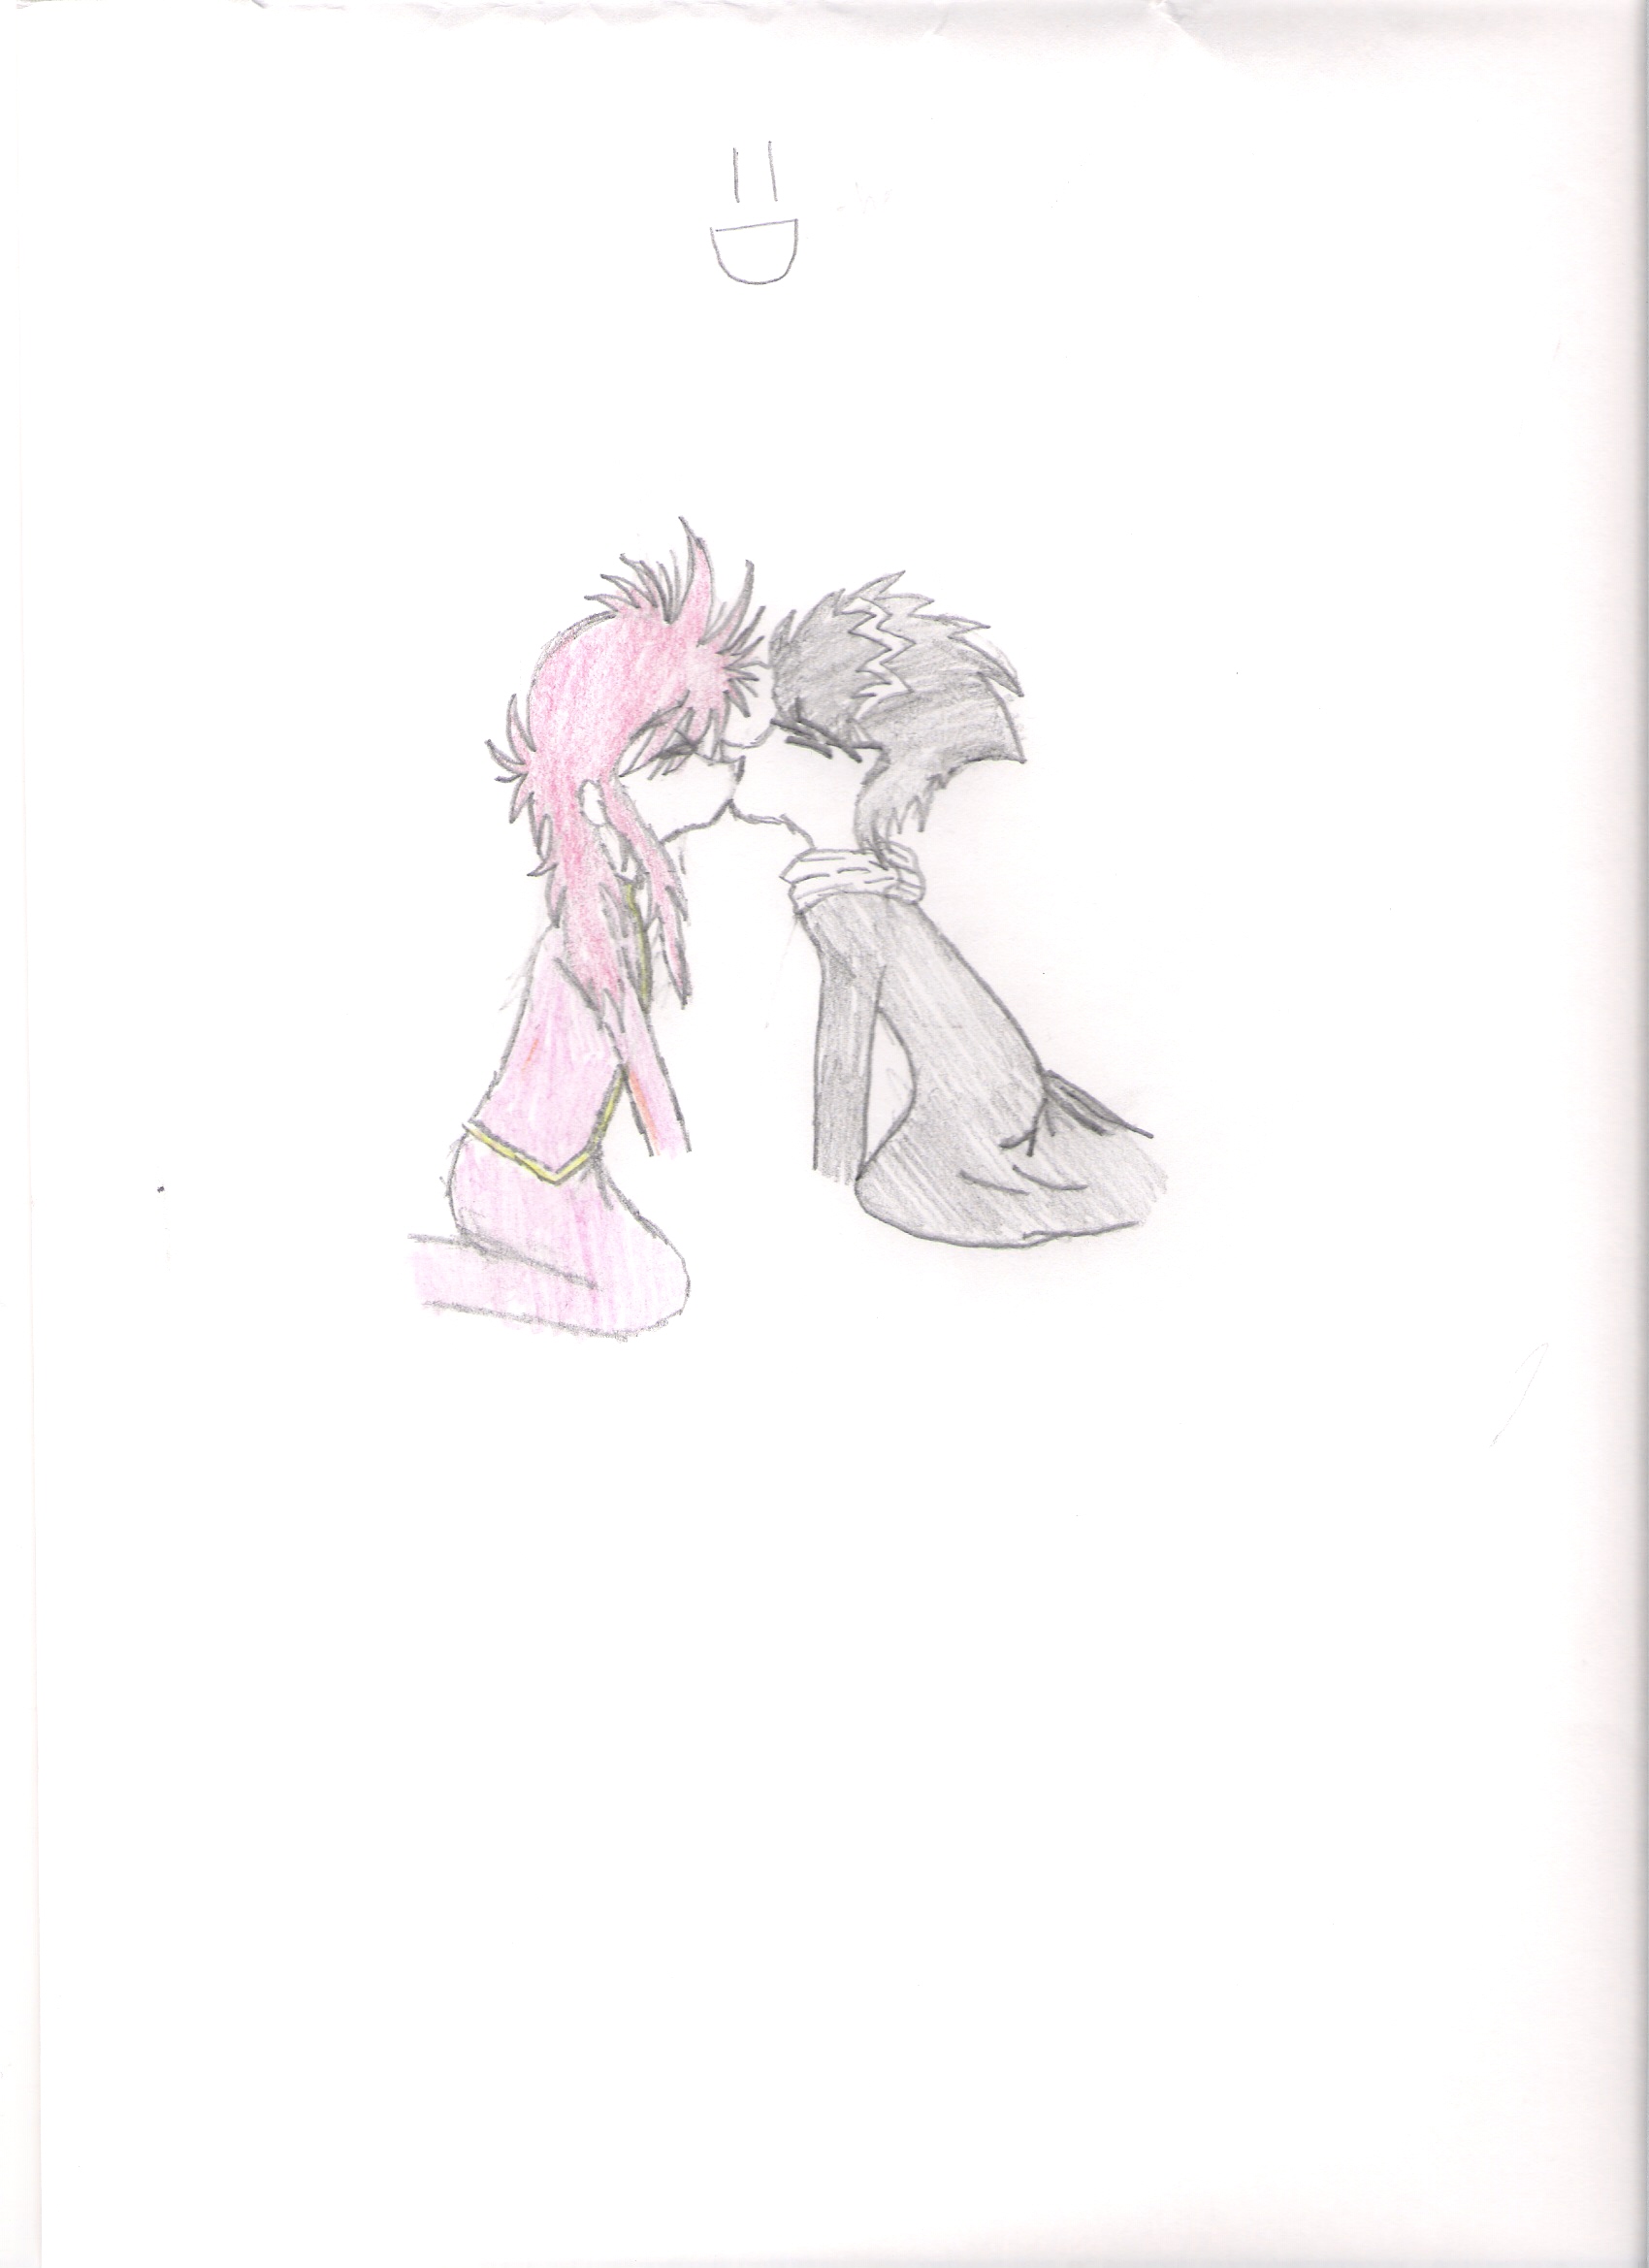 request for HxKlover, Hiei and Kurama kissing by hieiyaoi